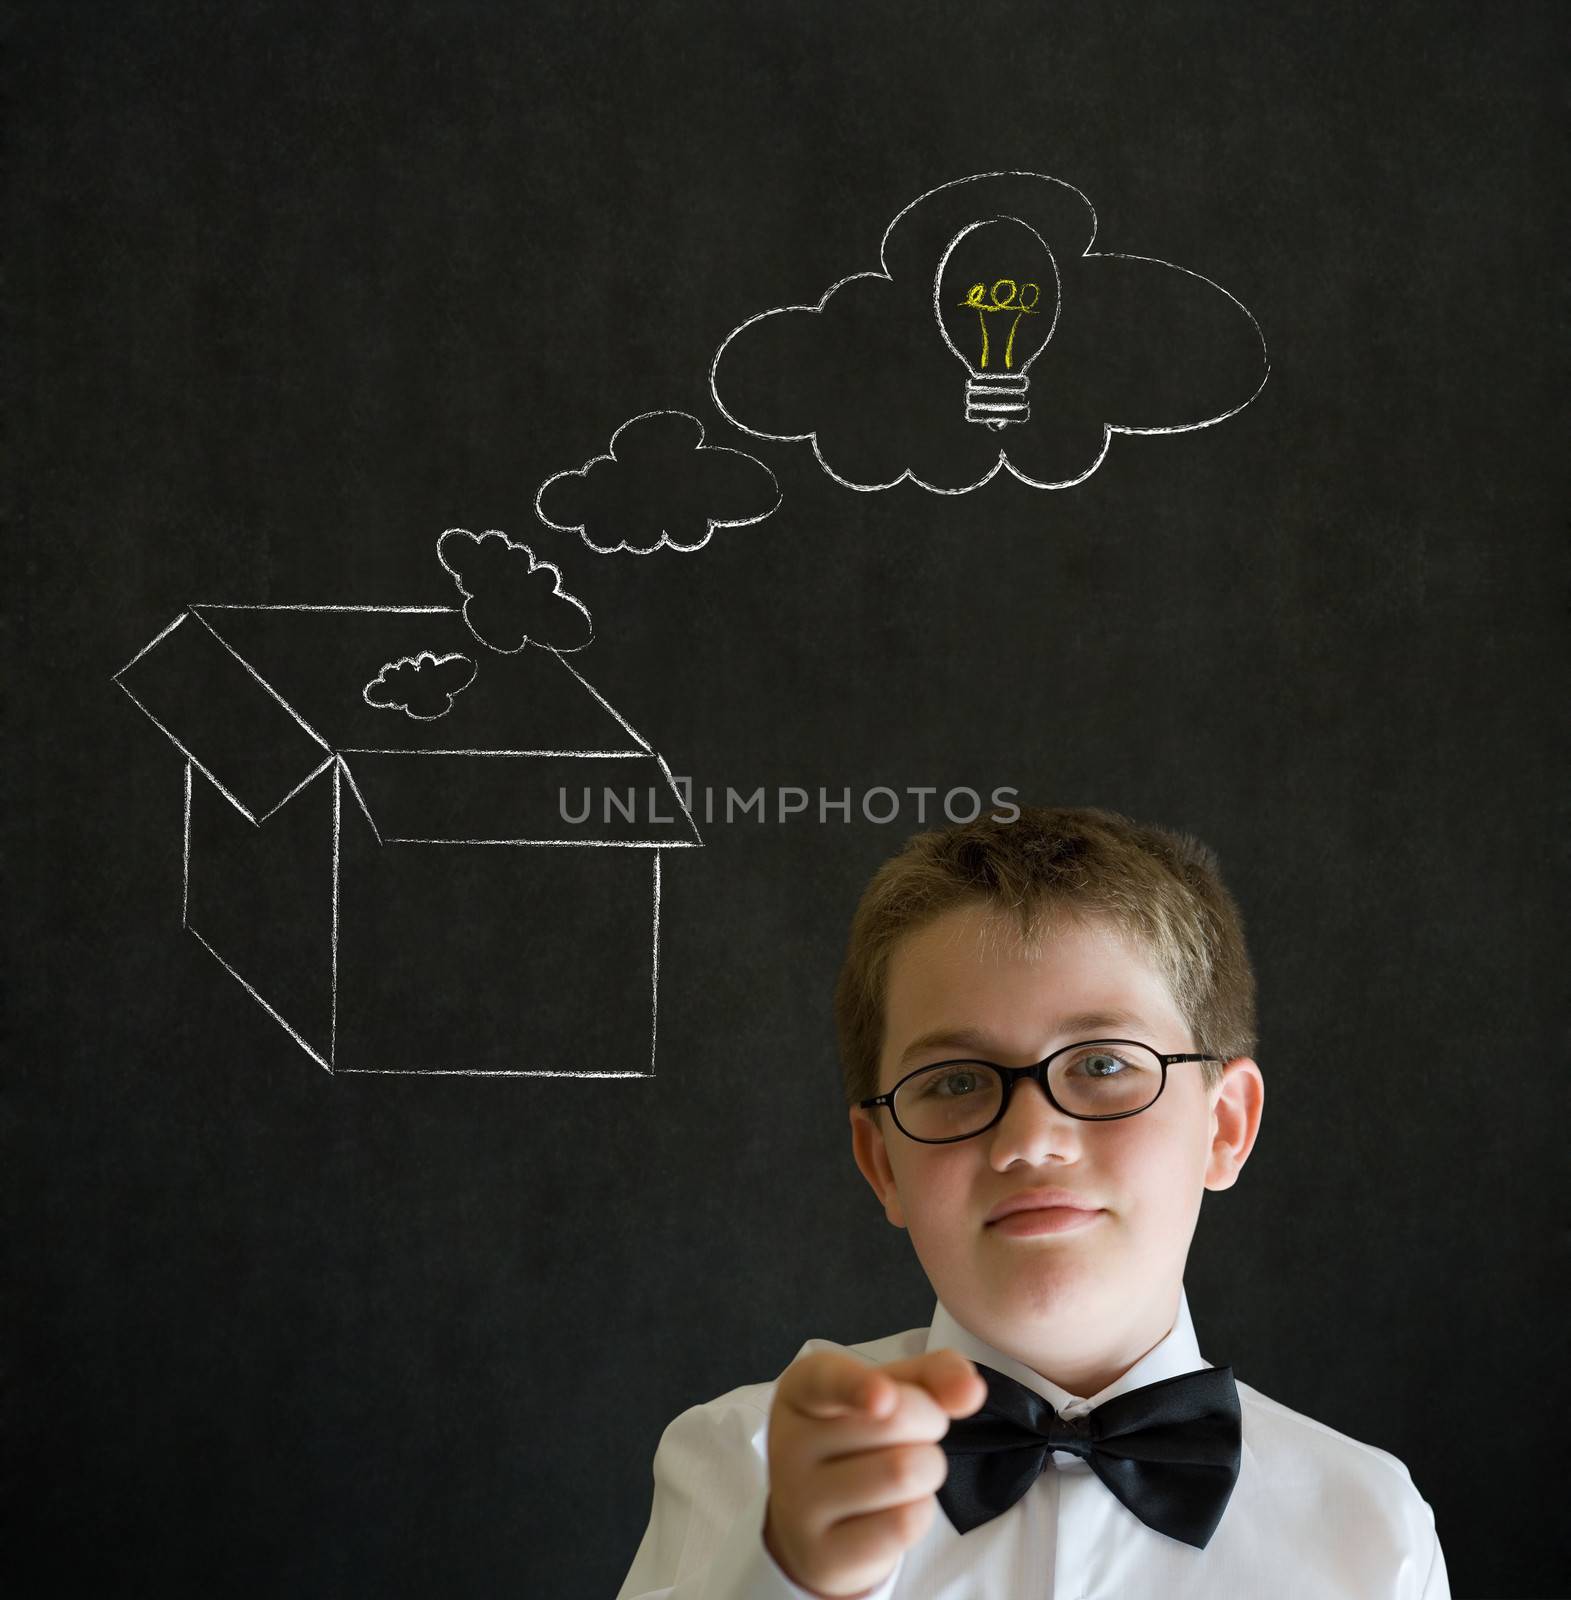 Education needs you thinking boy business man with thinking out the box concept by alistaircotton